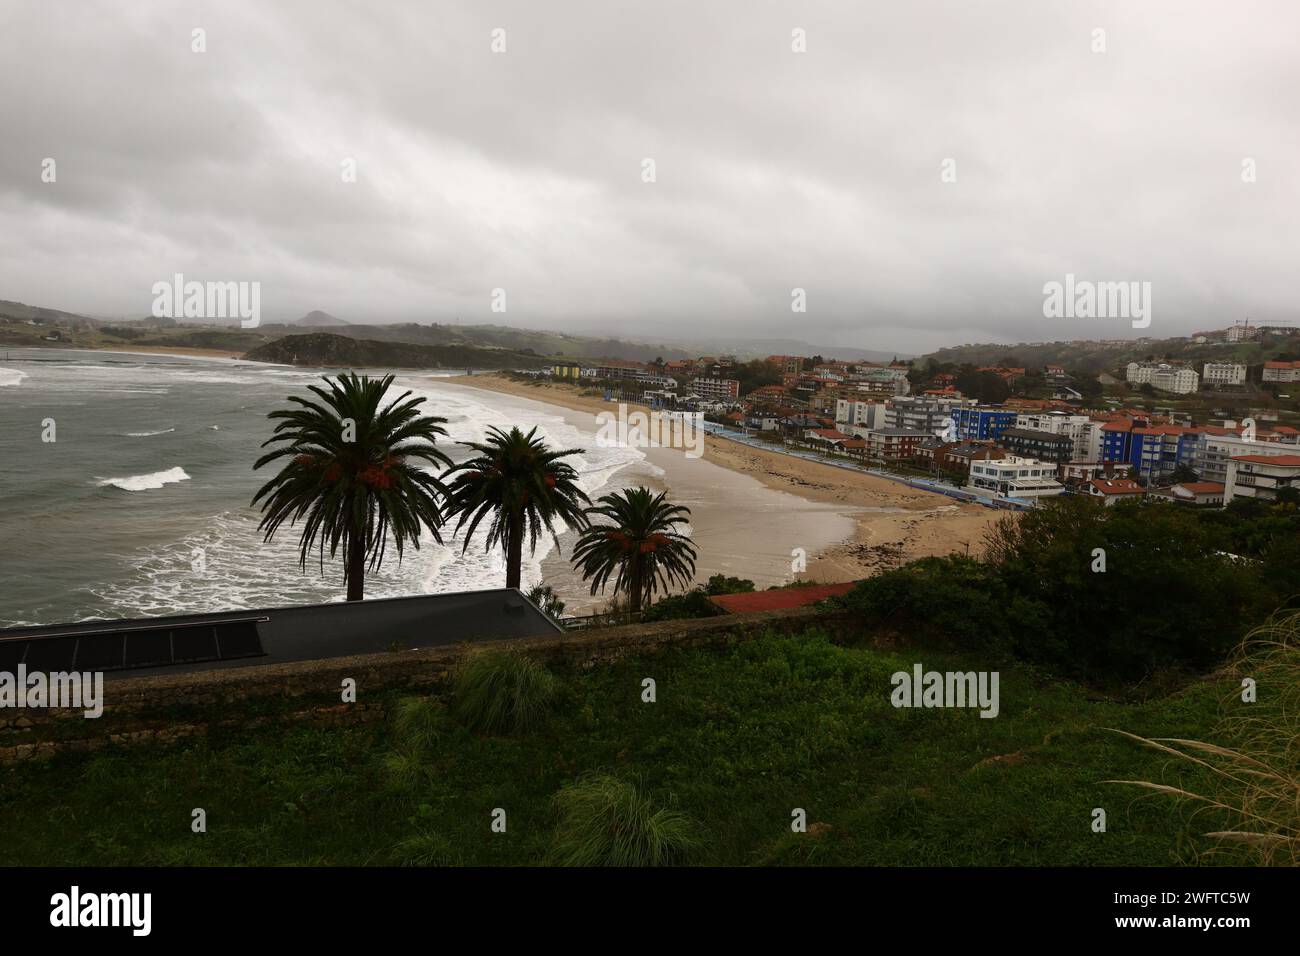 View on the Suances Beach located in Cantabria Province, Spain Stock Photo